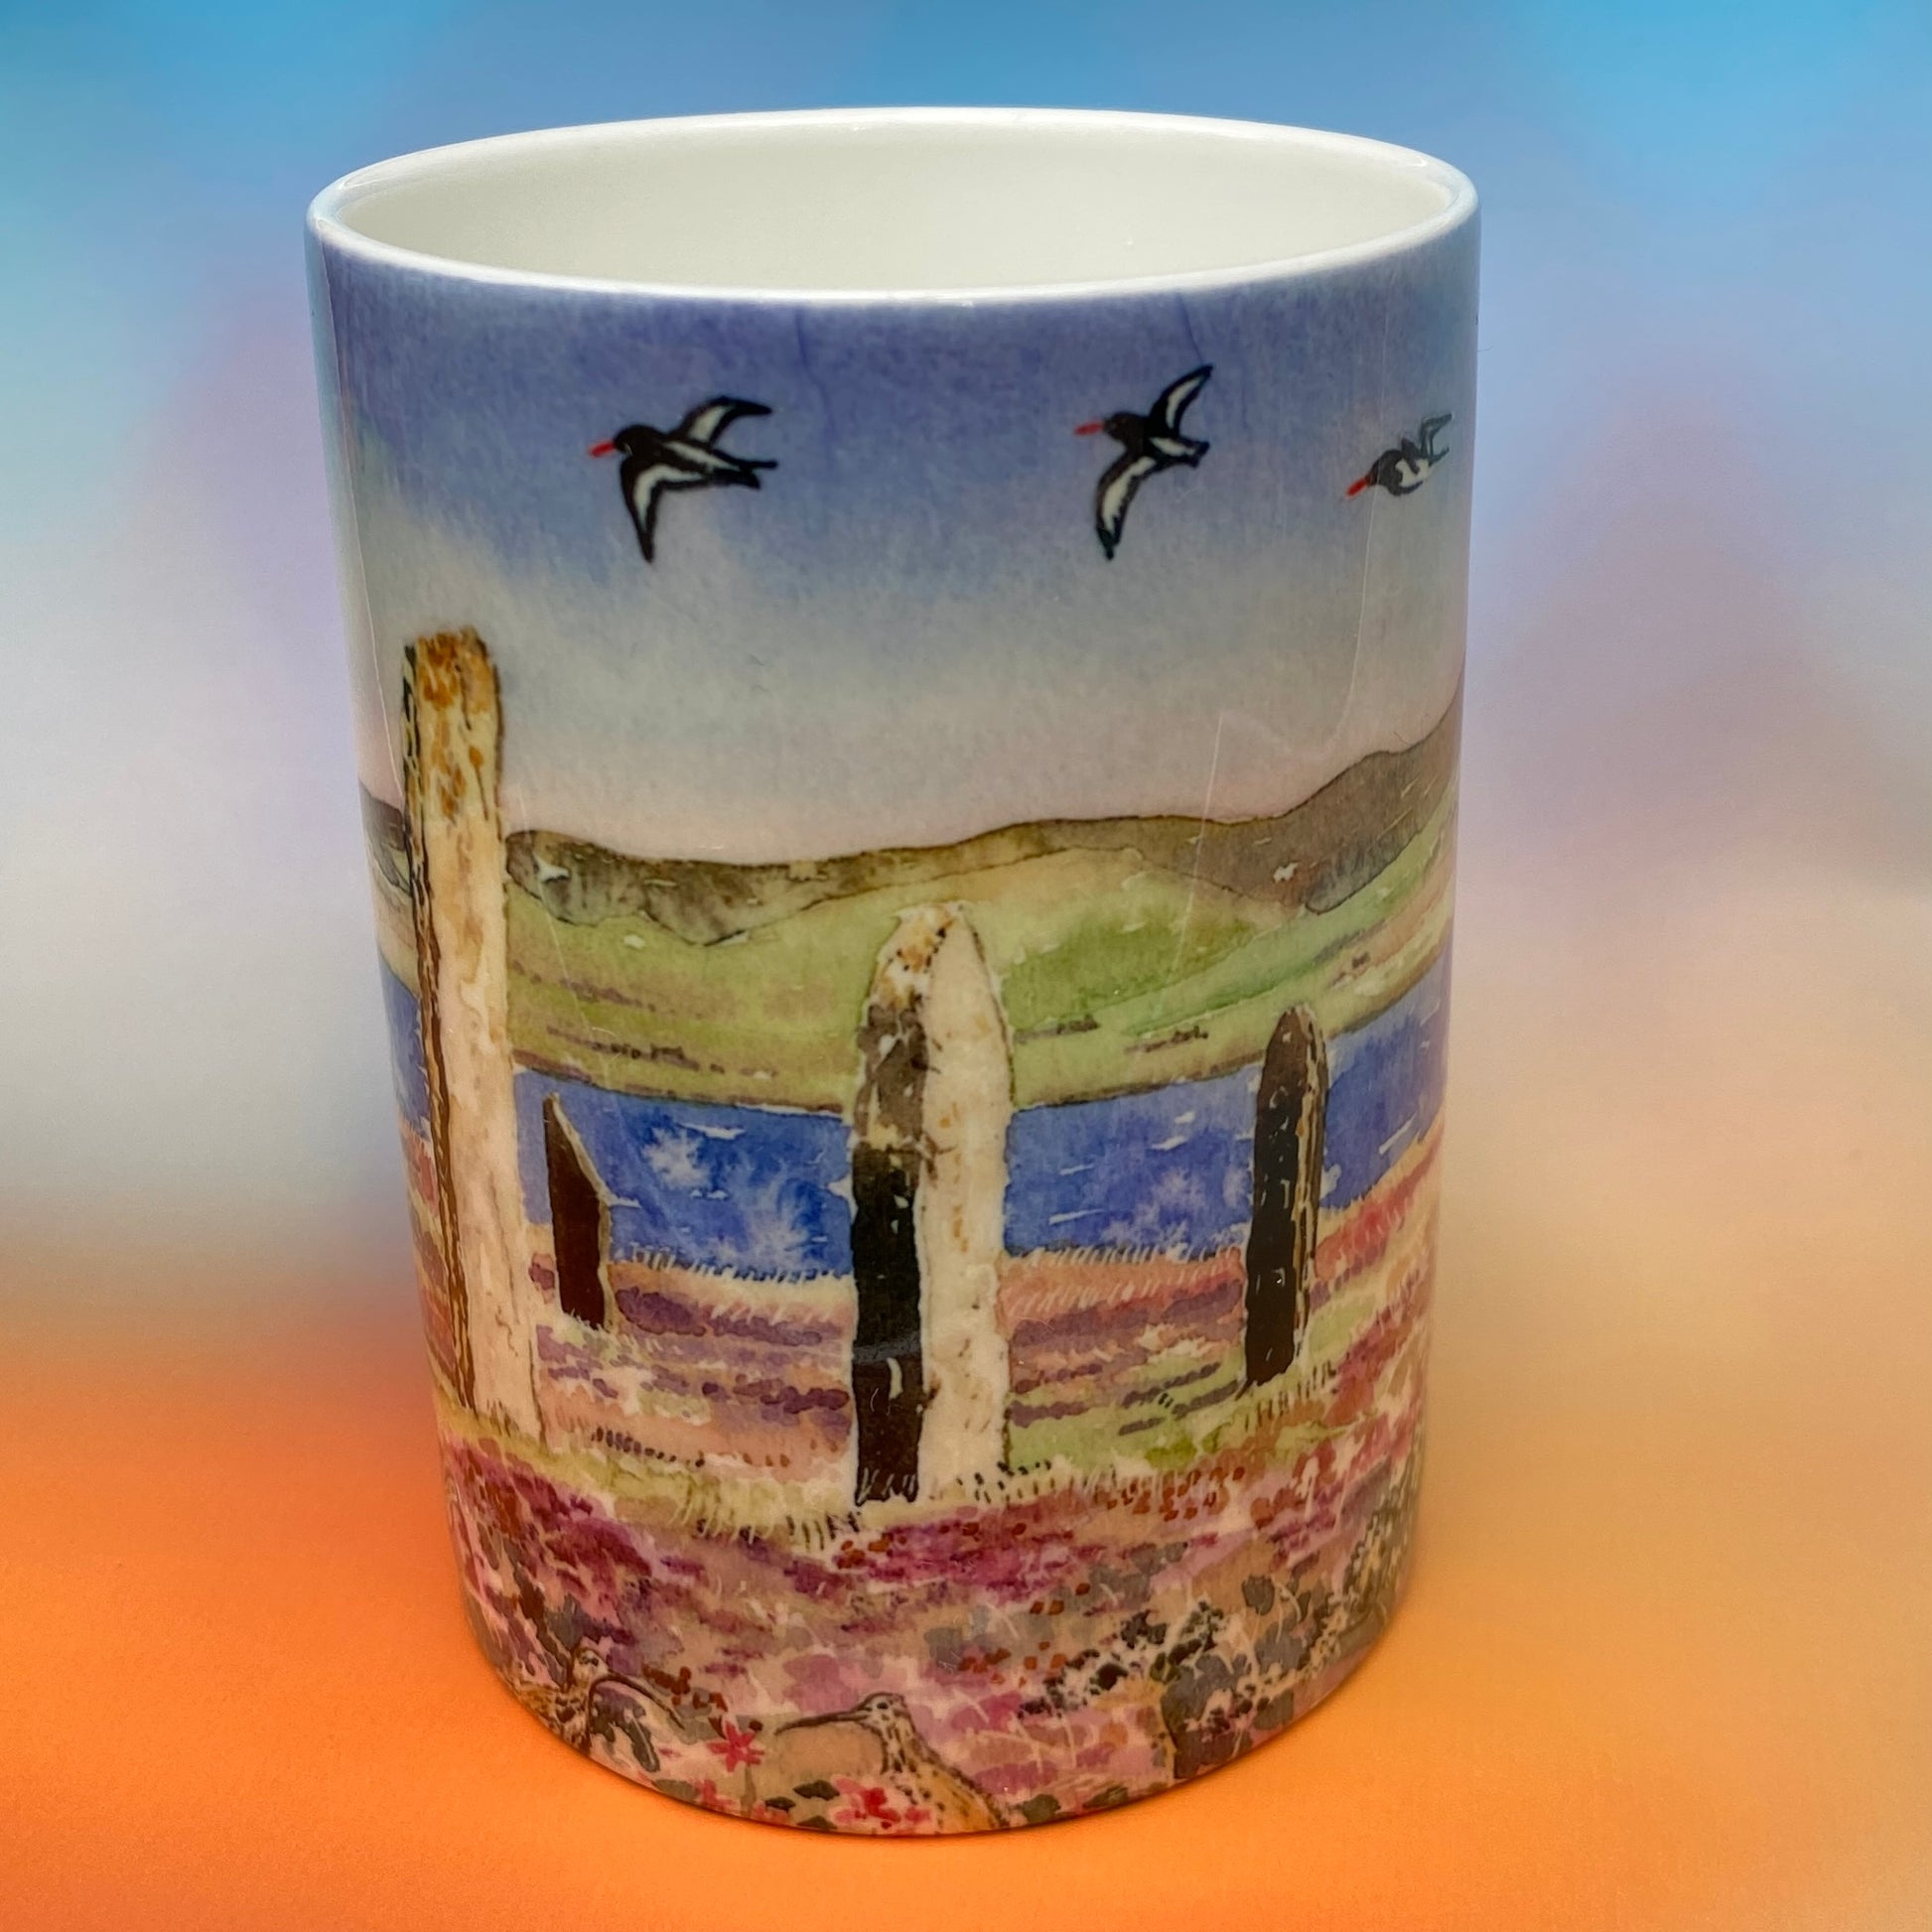 A mug with The ring of brodgar design by Orkney artist Jane Glue, Scotland